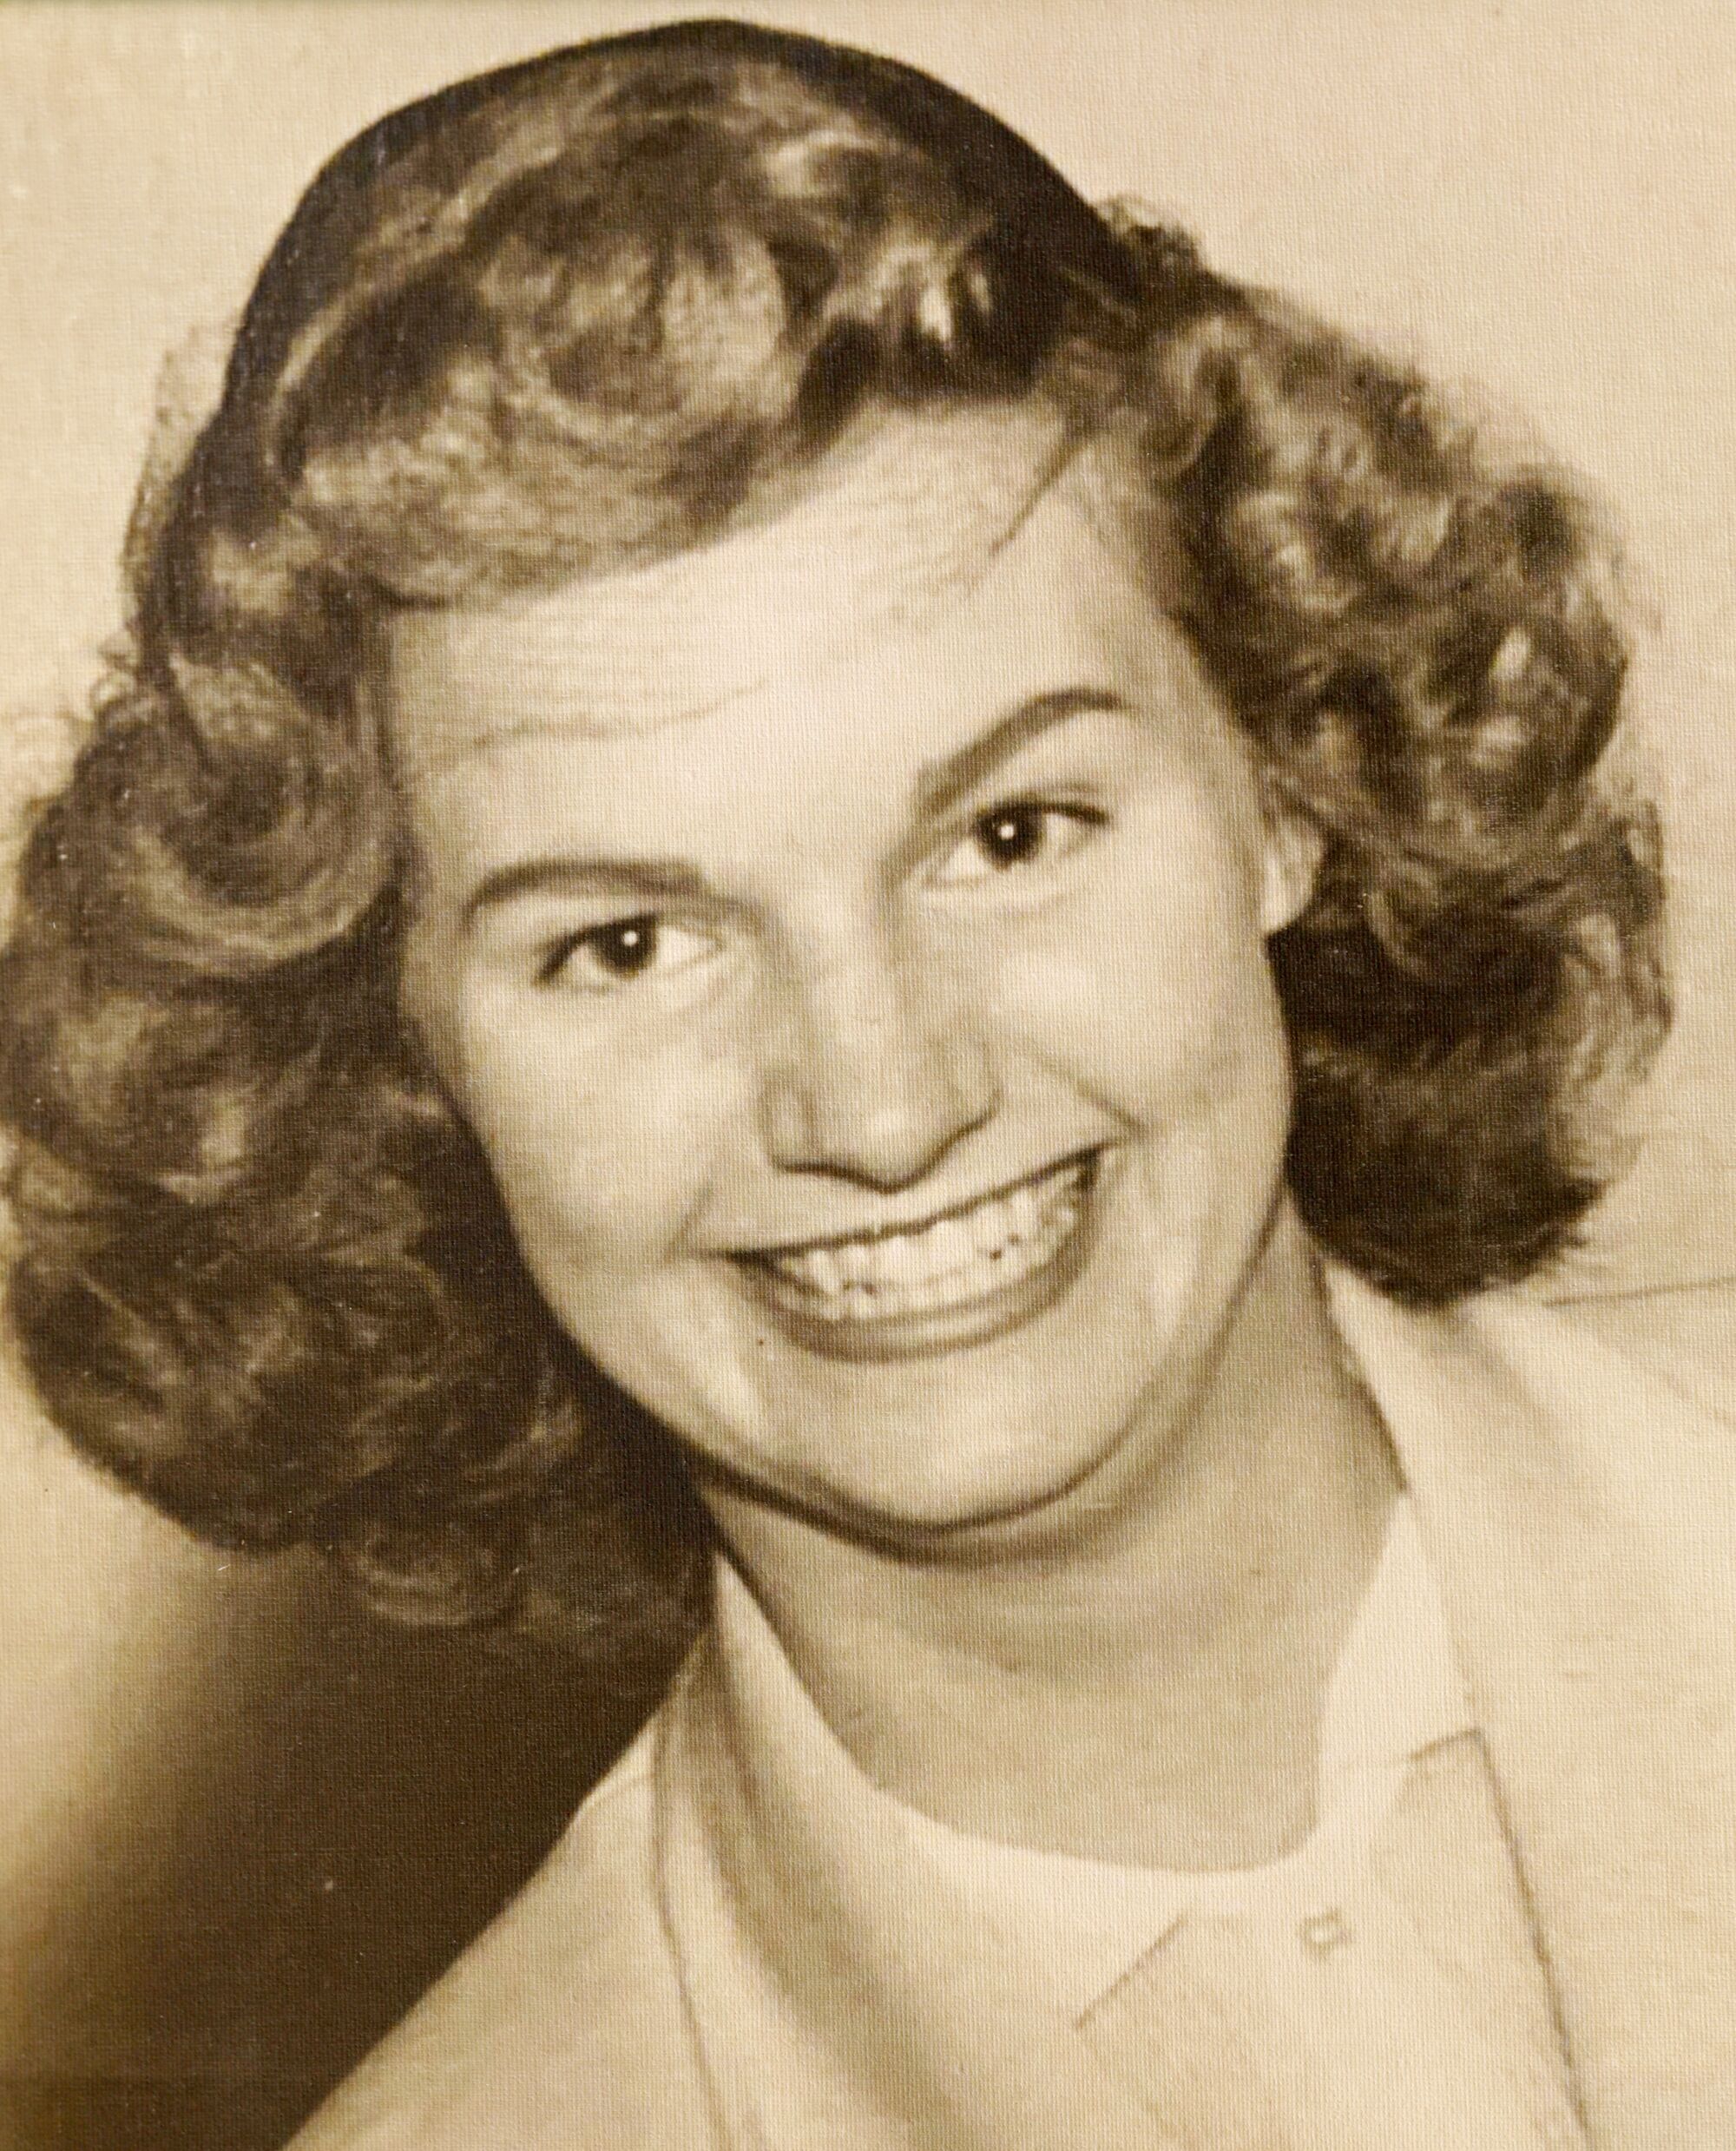 Lois Woodburn, shown here in her youth, was buried at sea after her passing at age 85 in 2021.